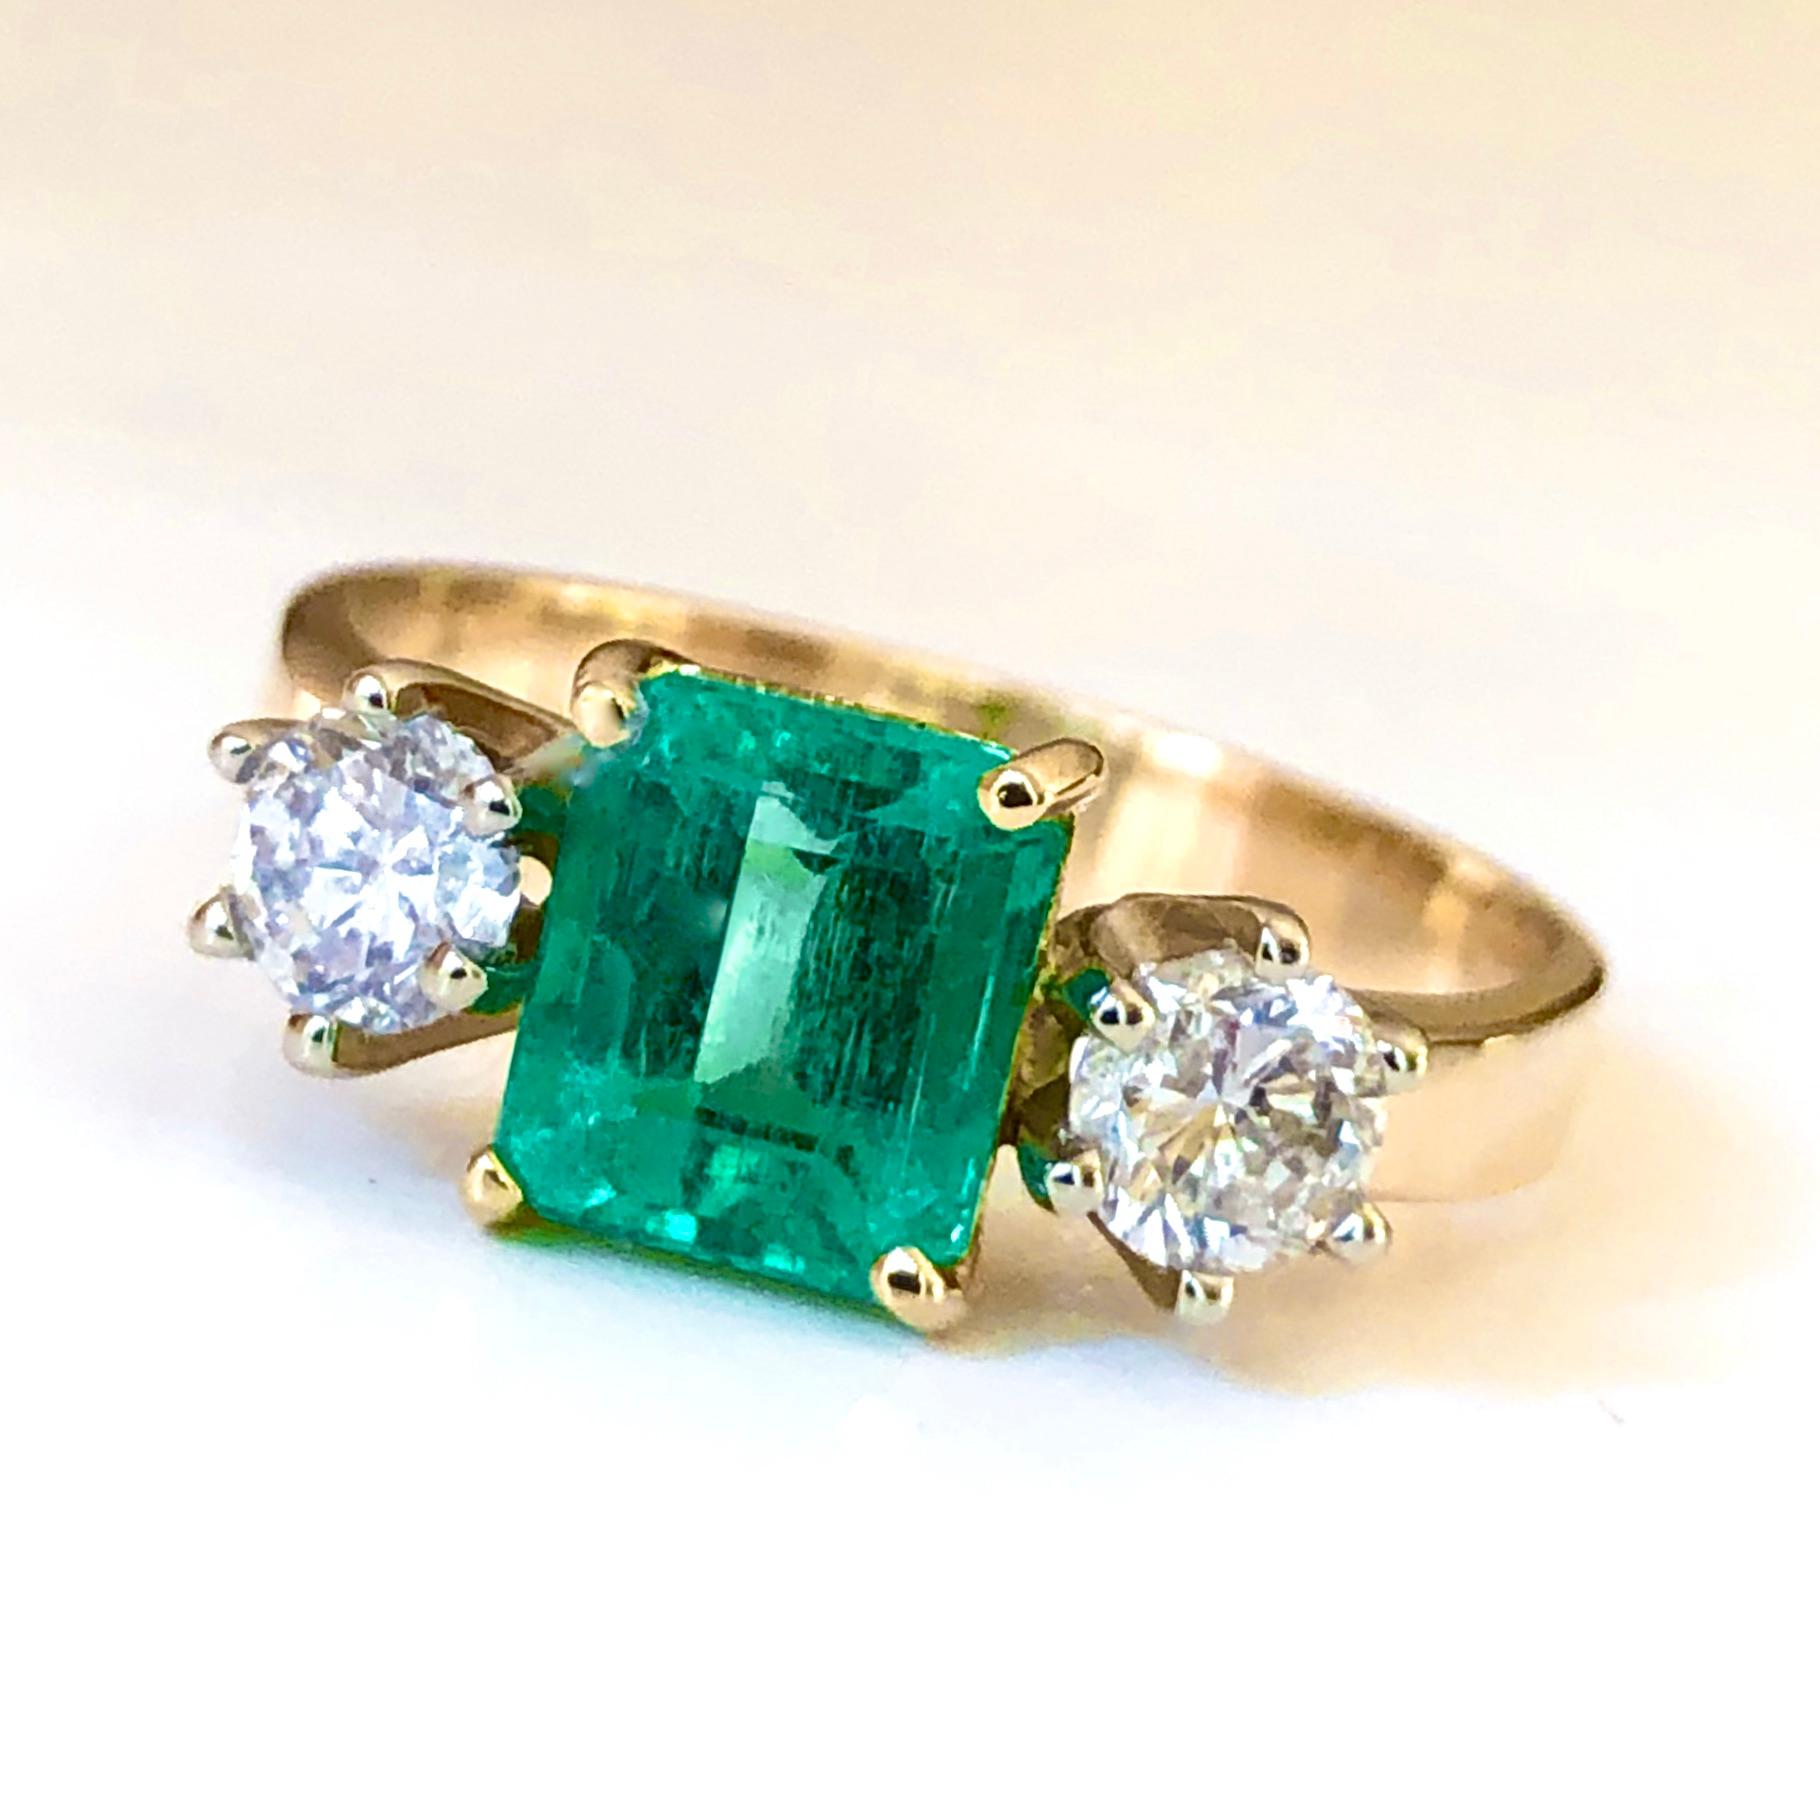 This elegant ring features a vivid AAA Colombian emerald 1.27 carat emerald cut, medium green color. Set in a 18K gold handmade, three-stone engagement ring with round brilliant cut diamonds side stones 0.56 ctw of H color and SI1 clarity, this ring